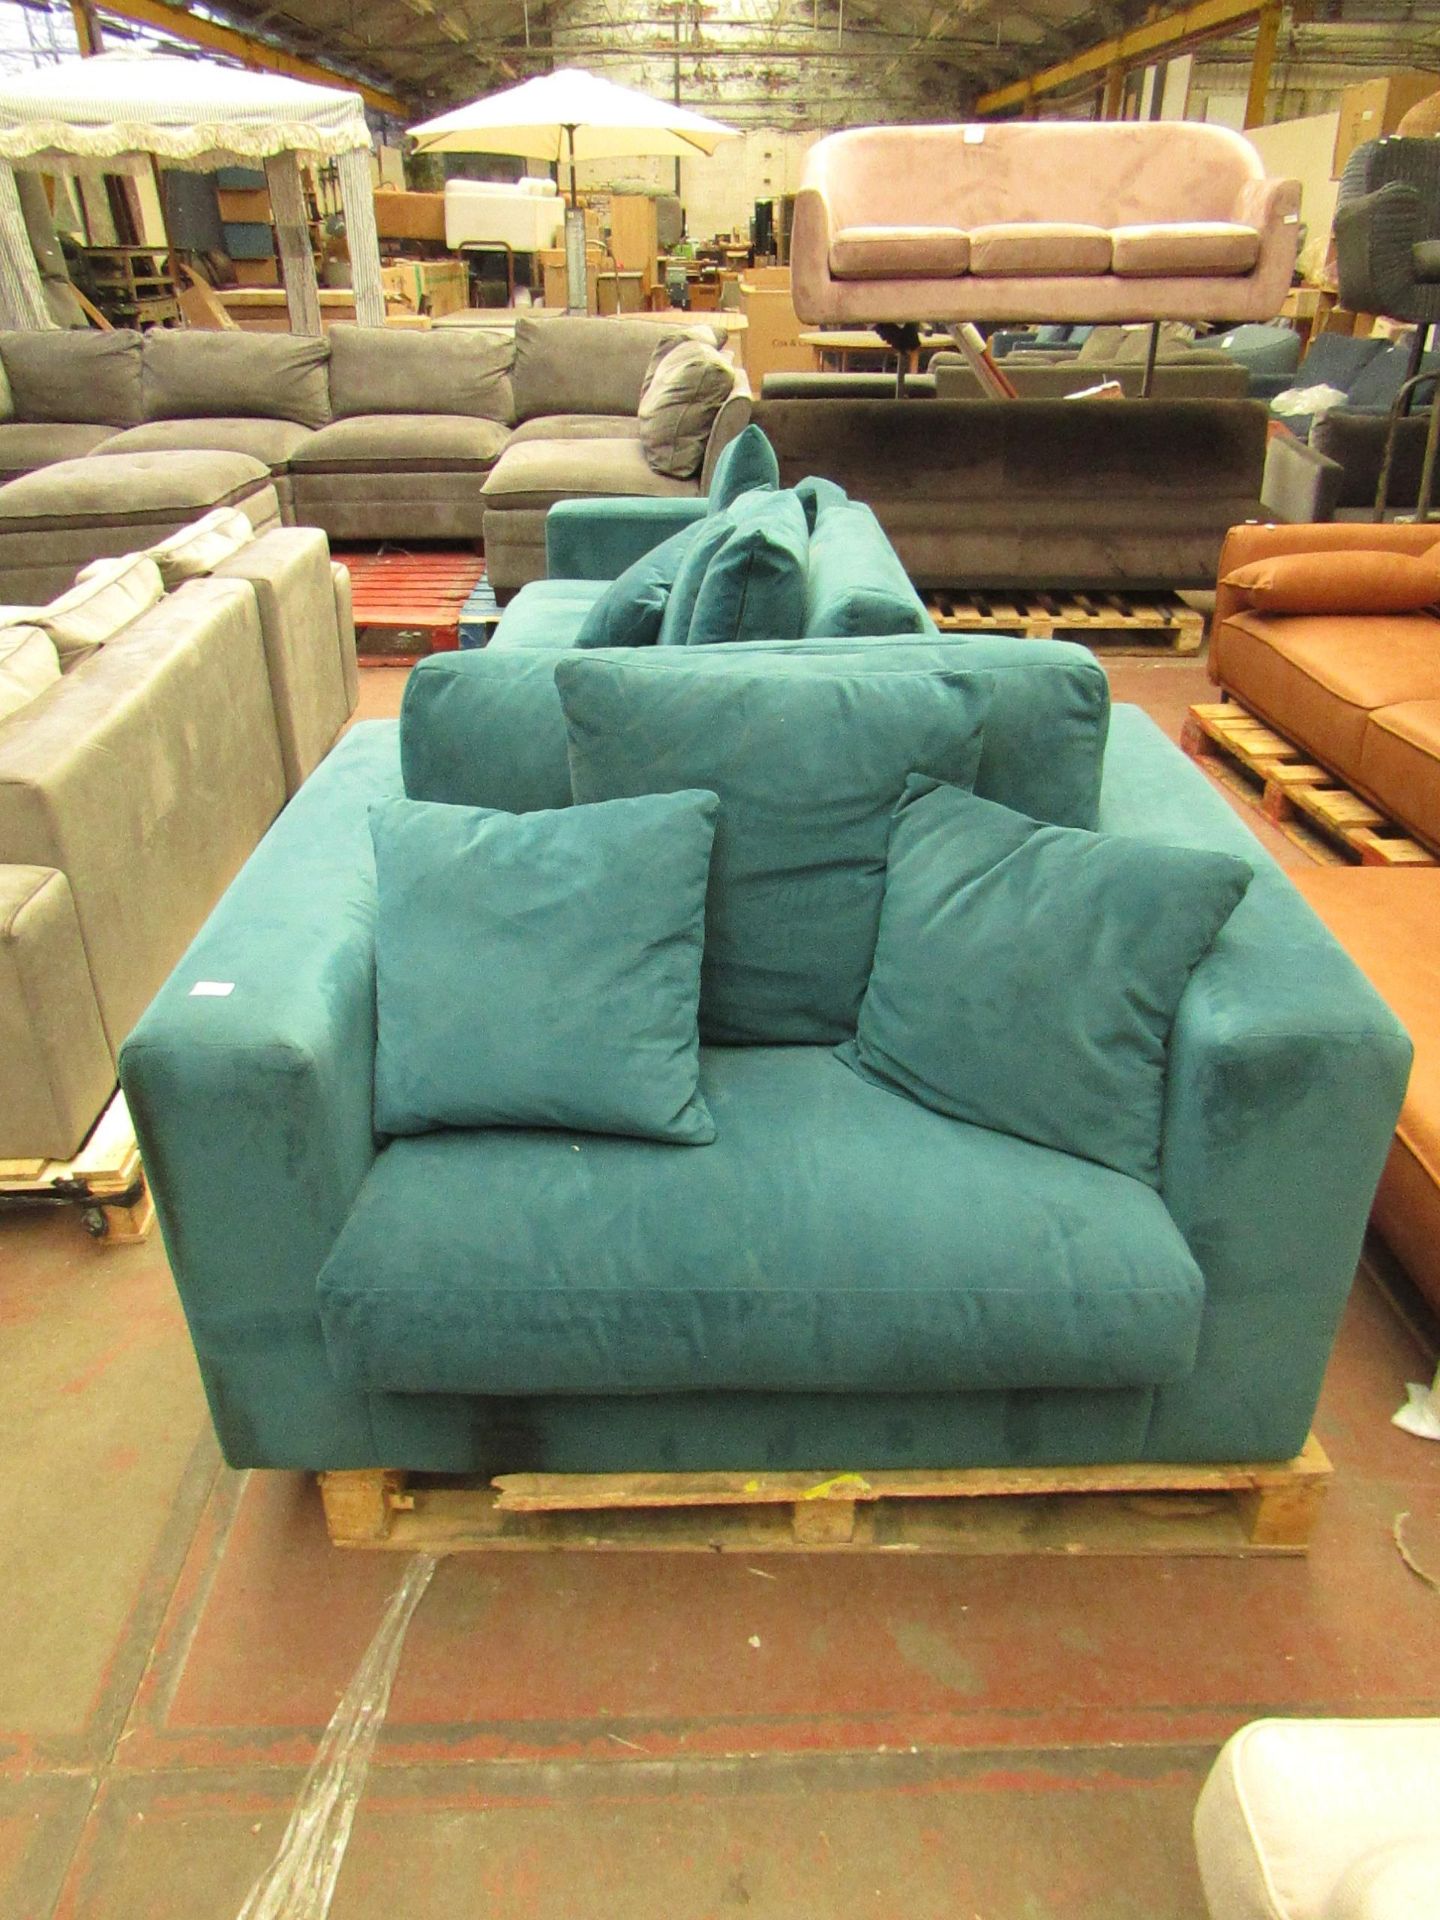 | 1X | MADE.COM BLUE ARMCHAIR | HAS A MARK ON THE FRONT AND ,MISSING FEET | RRP - |